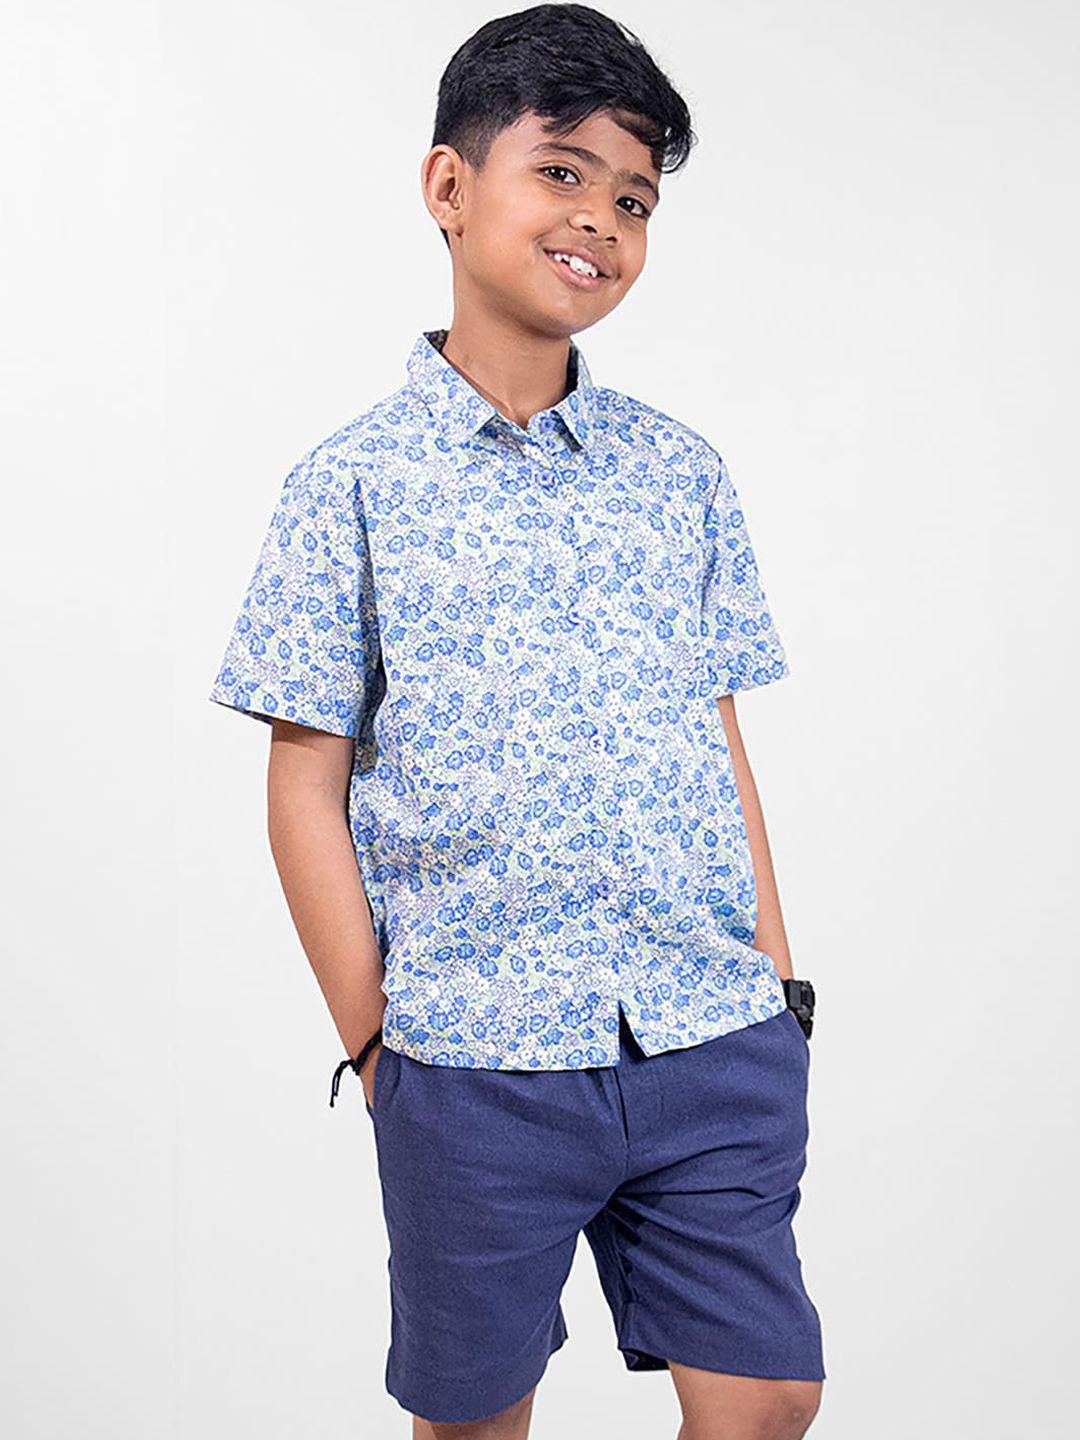 whistle & hops boys floral printed shorts